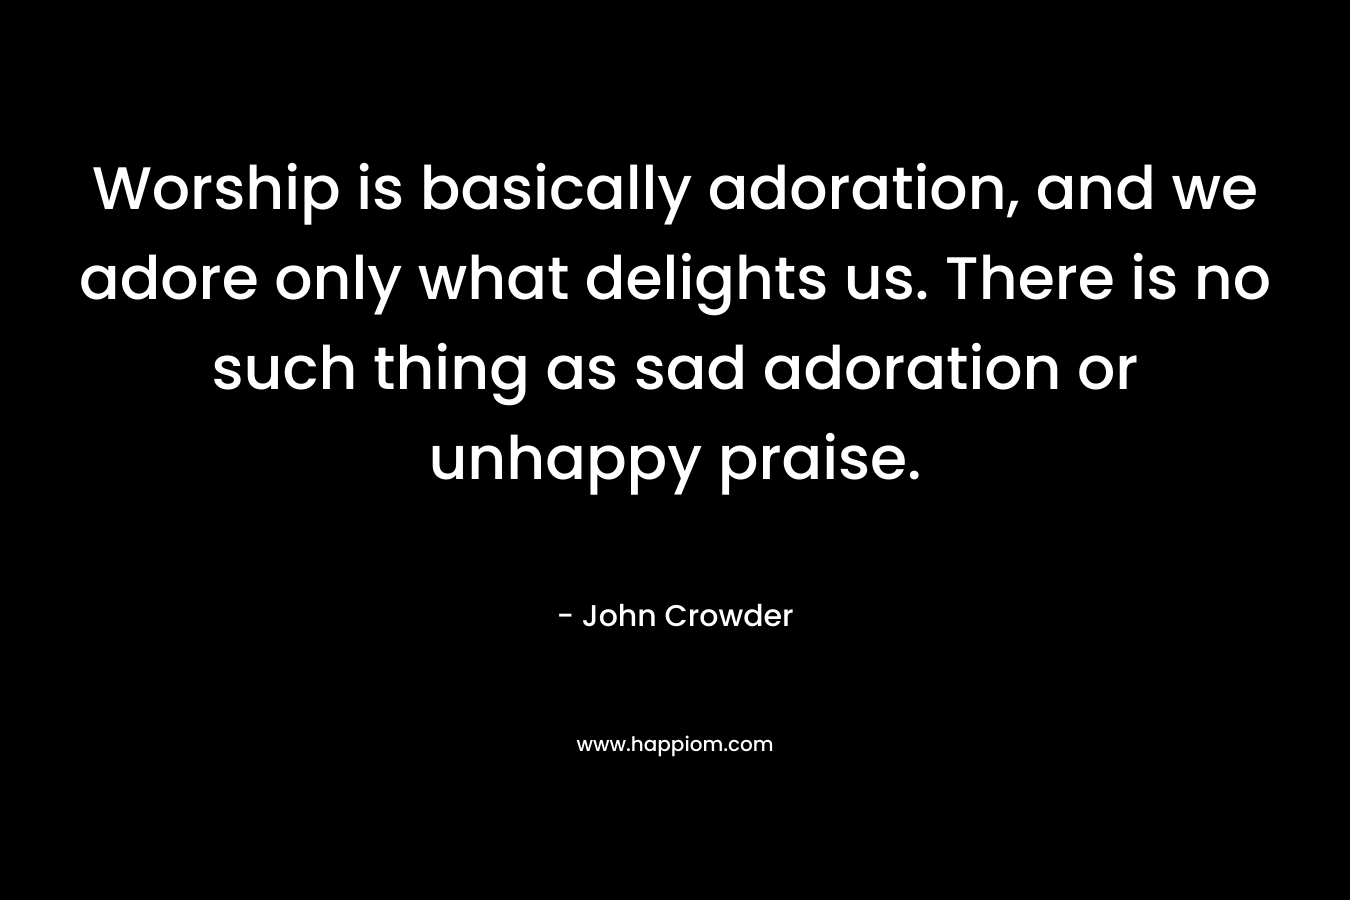 Worship is basically adoration, and we adore only what delights us. There is no such thing as sad adoration or unhappy praise.